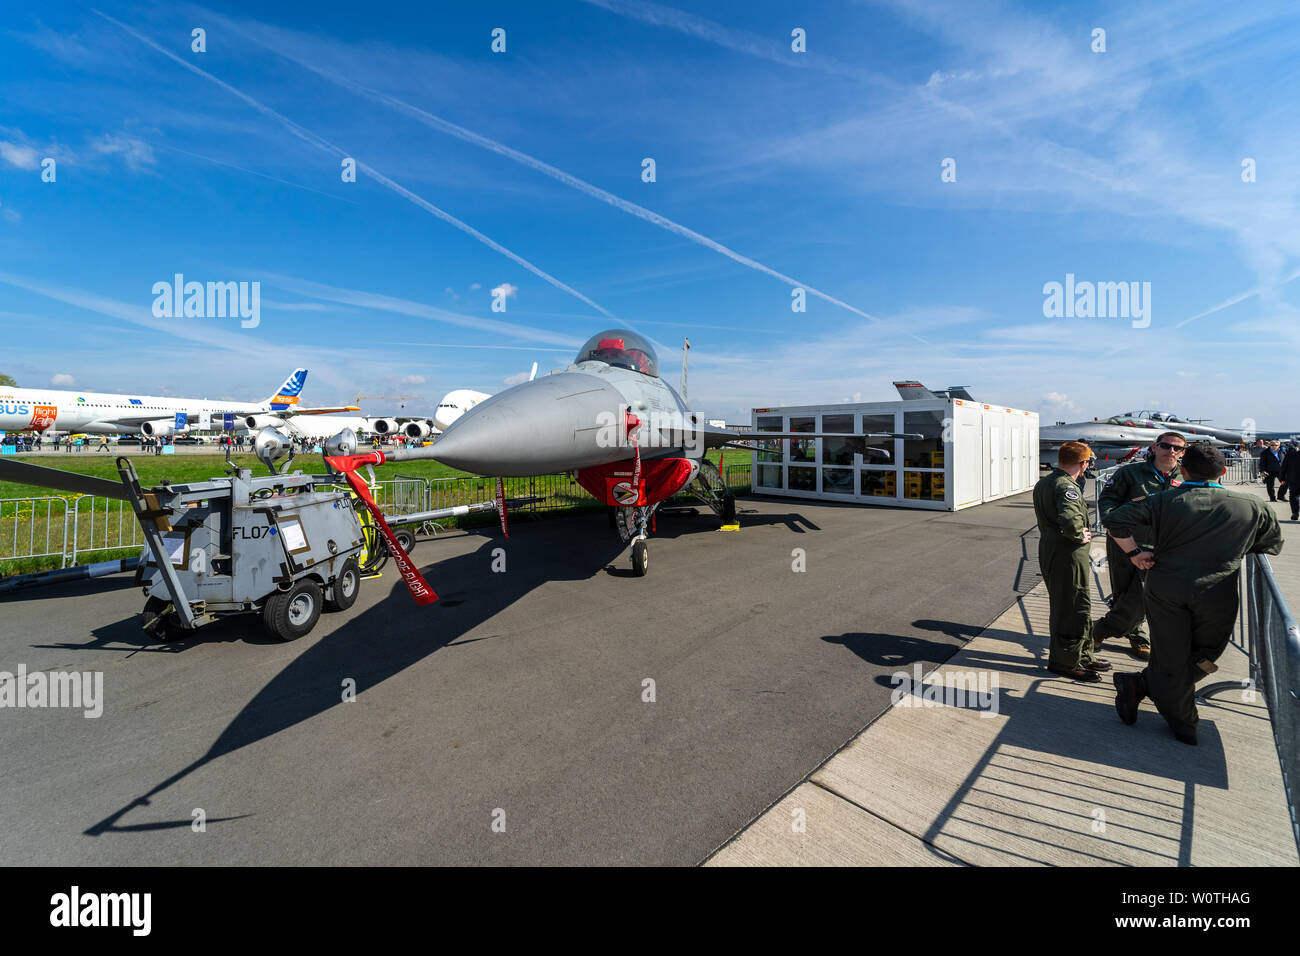 BERLIN - APRIL 27, 2018: Multirole fighter, air superiority fighter General Dynamics F-16 Fighting Falcon. US Air Force. Exhibition ILA Berlin Air Show 2018. Stock Photo